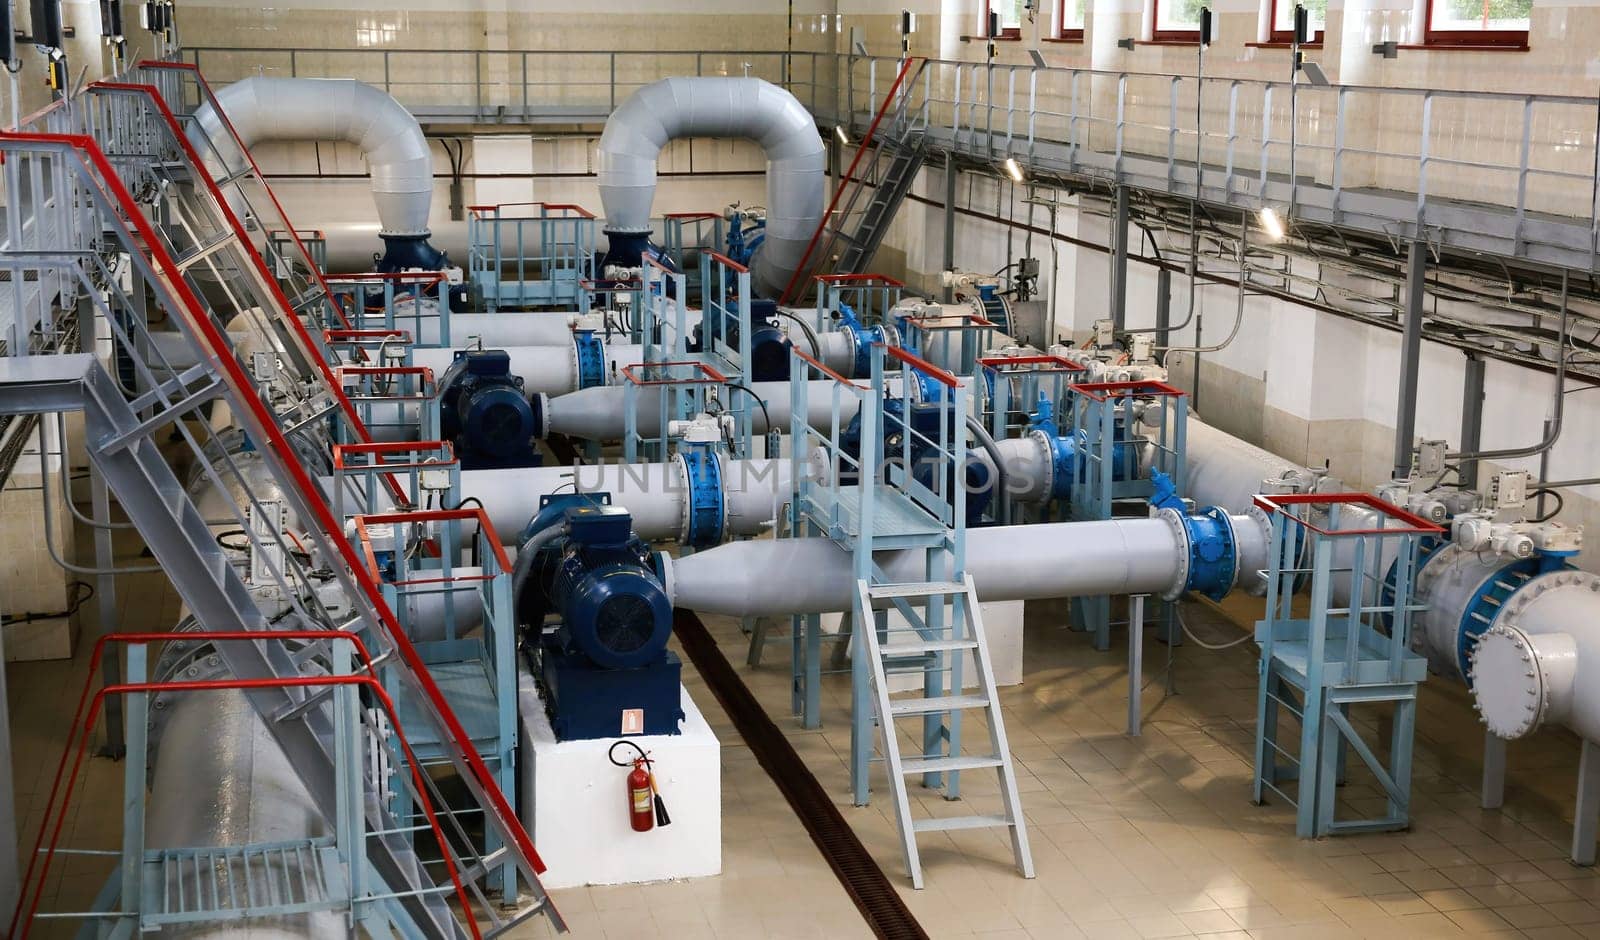 The industrial water pumping station features well-maintained pumps, pipes, and valves, brightly lit and showcasing precise engineering in efficient water management.